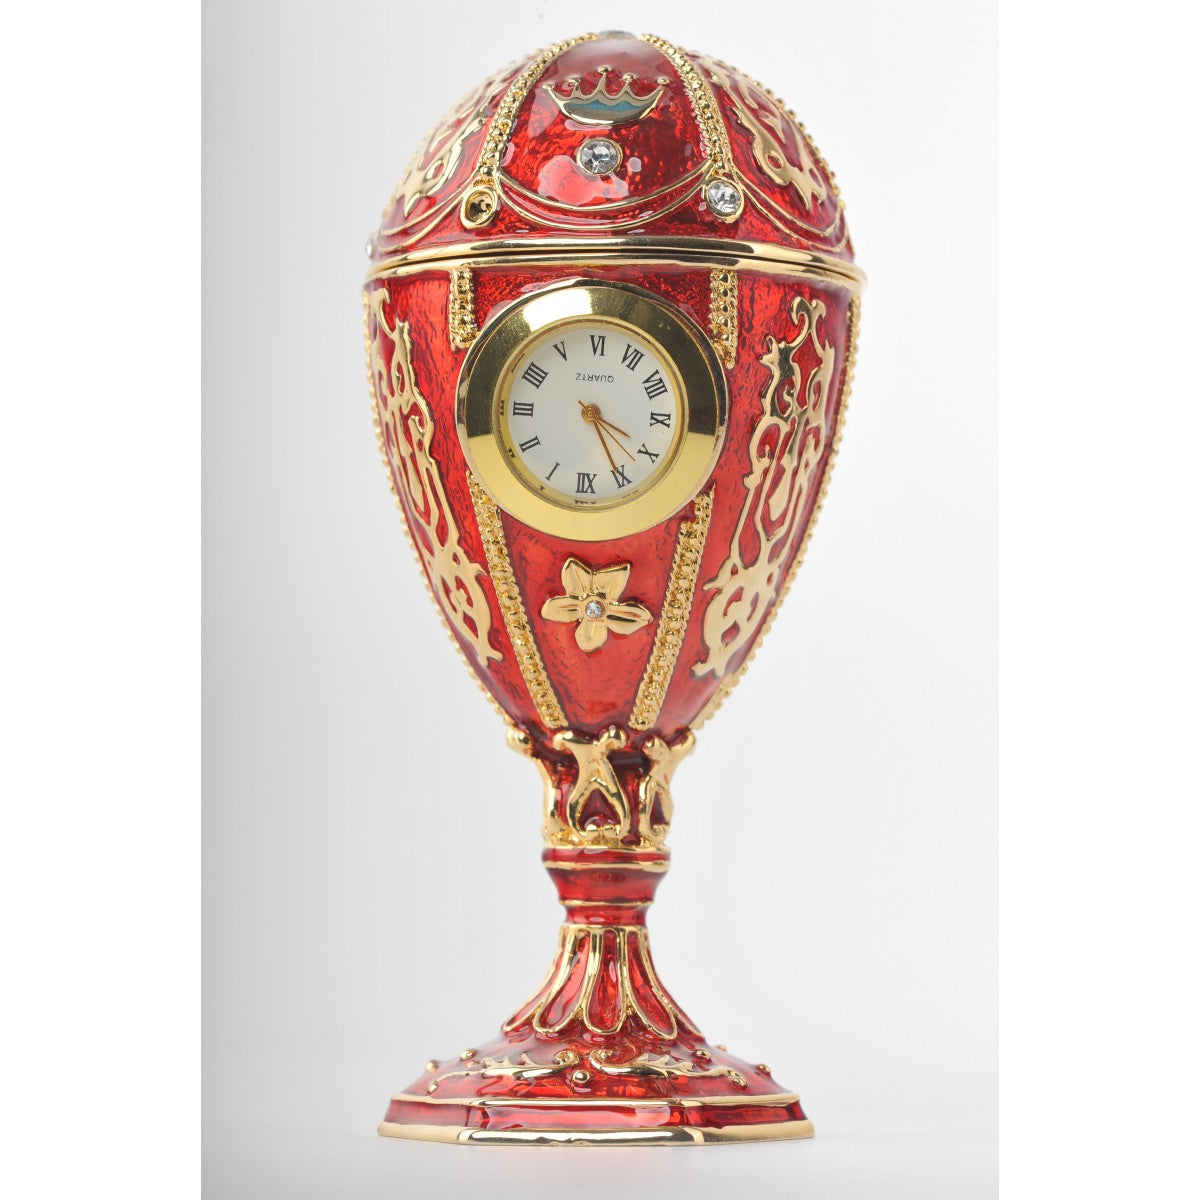 Faberge red egg with clock by Keren Kopal